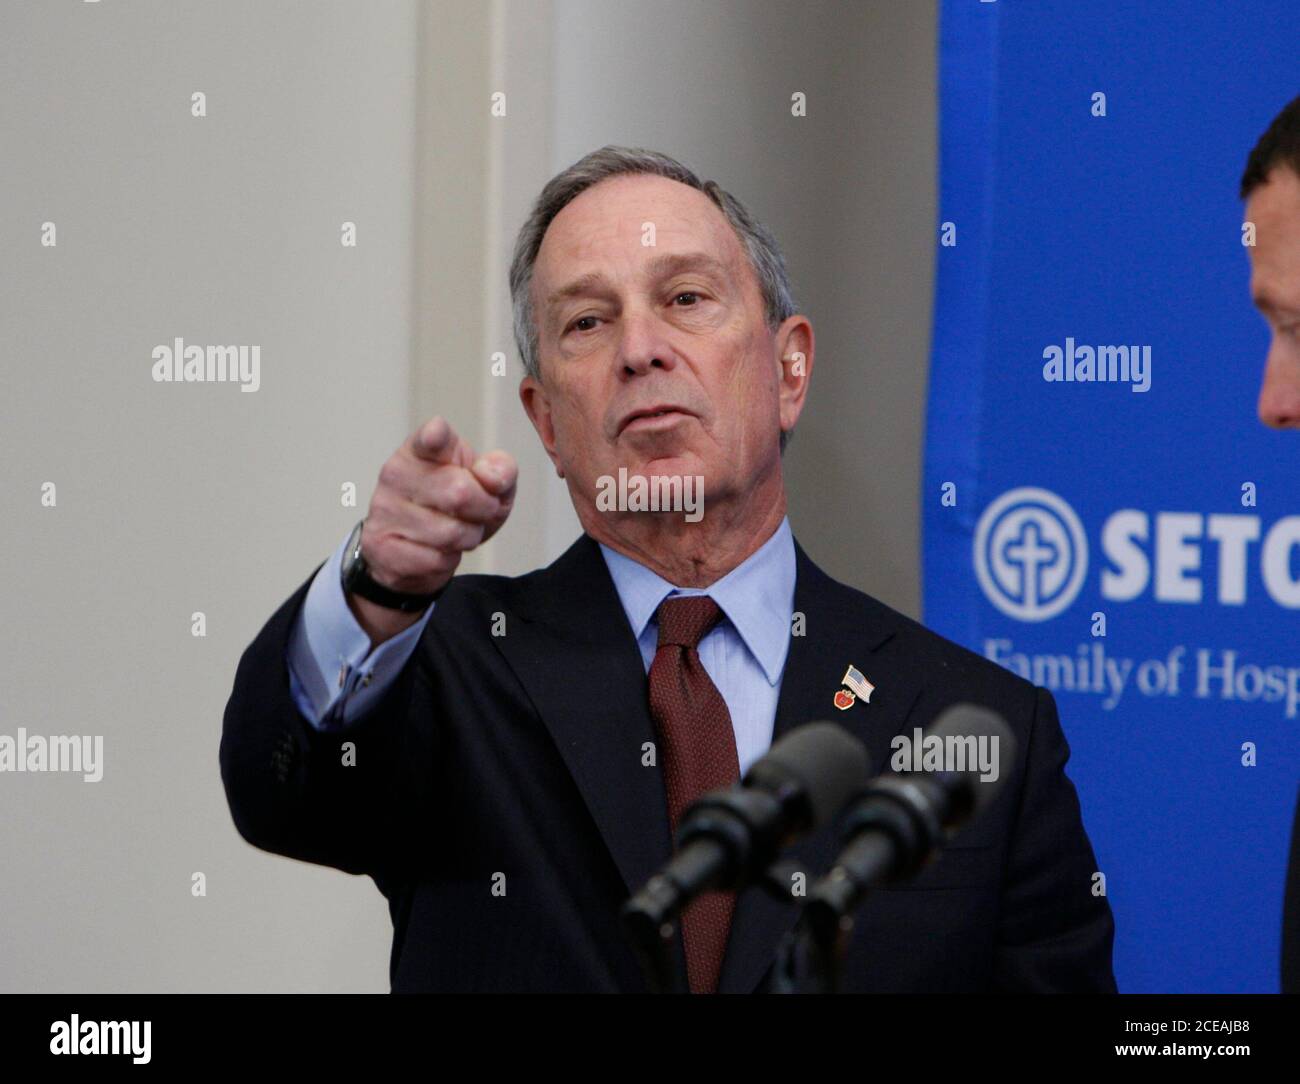 Austin, Texas: January 18, 2008: New York CIty Mayor Michael Bloomberg points to a questioner at a hospital news conference in Austin. ©Bob Daemmrich / Stock Photo